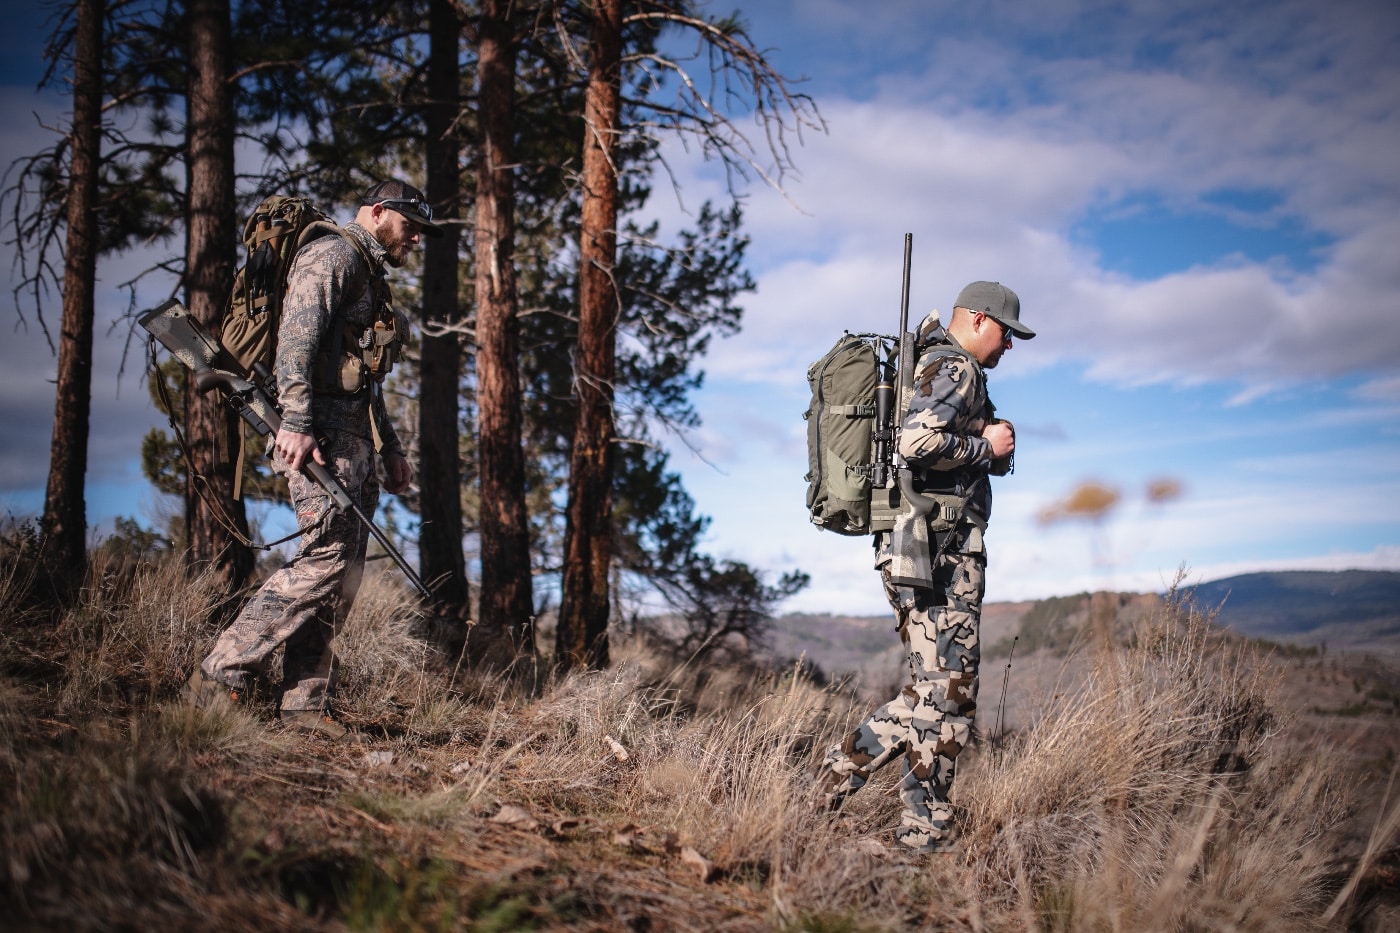 In this photo we see a pair of hunters wearing camouflage clothing as they carry Springfield Waypoint long-action rifles into the field for a hunt.